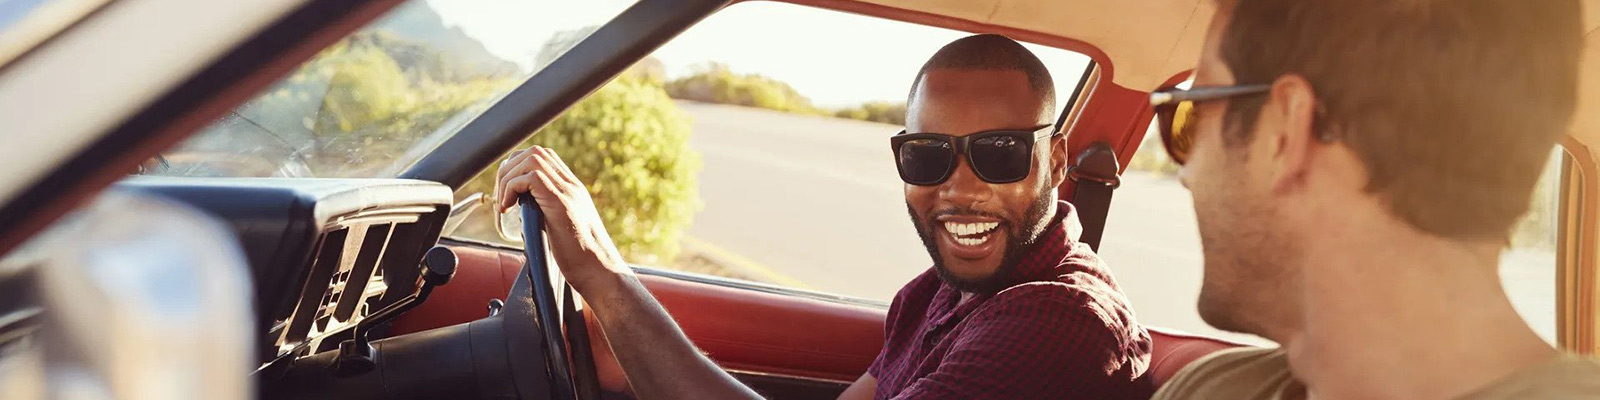 male driving a car smiling at passenger